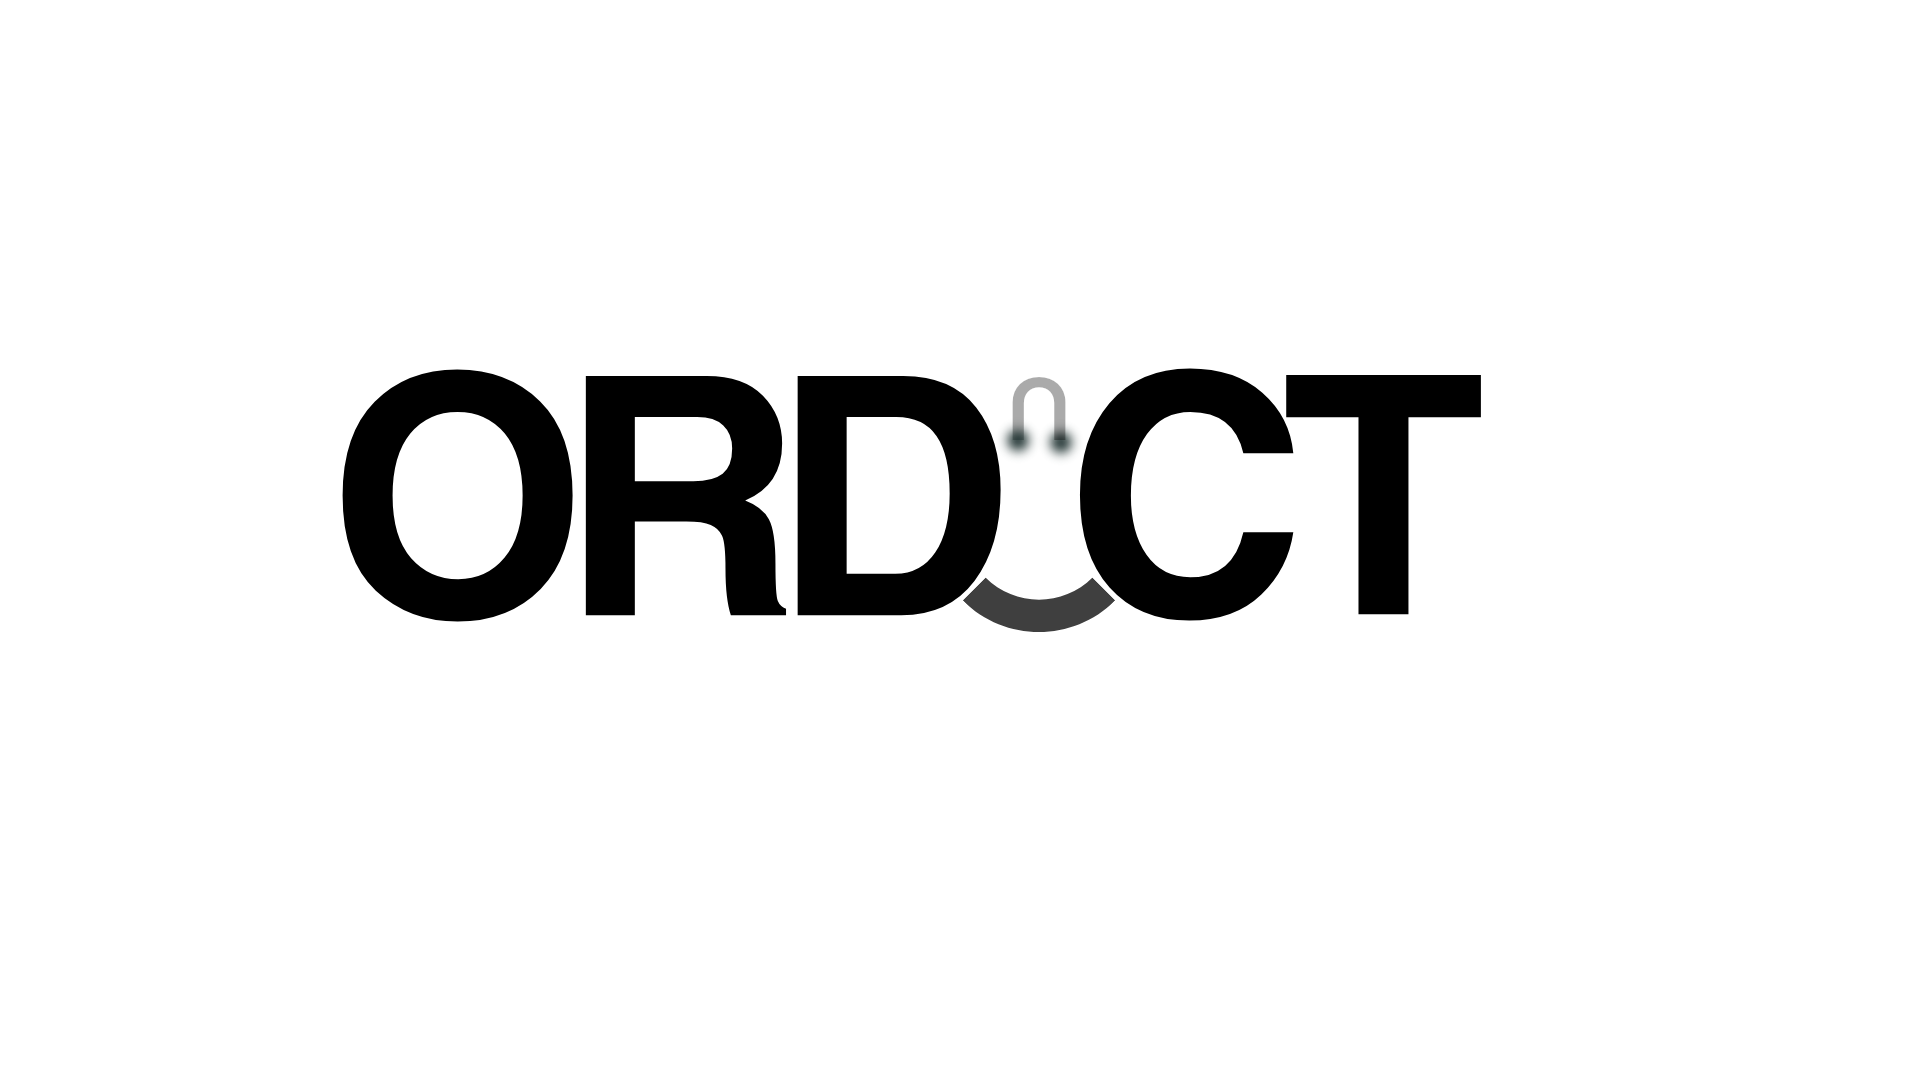 Orduct